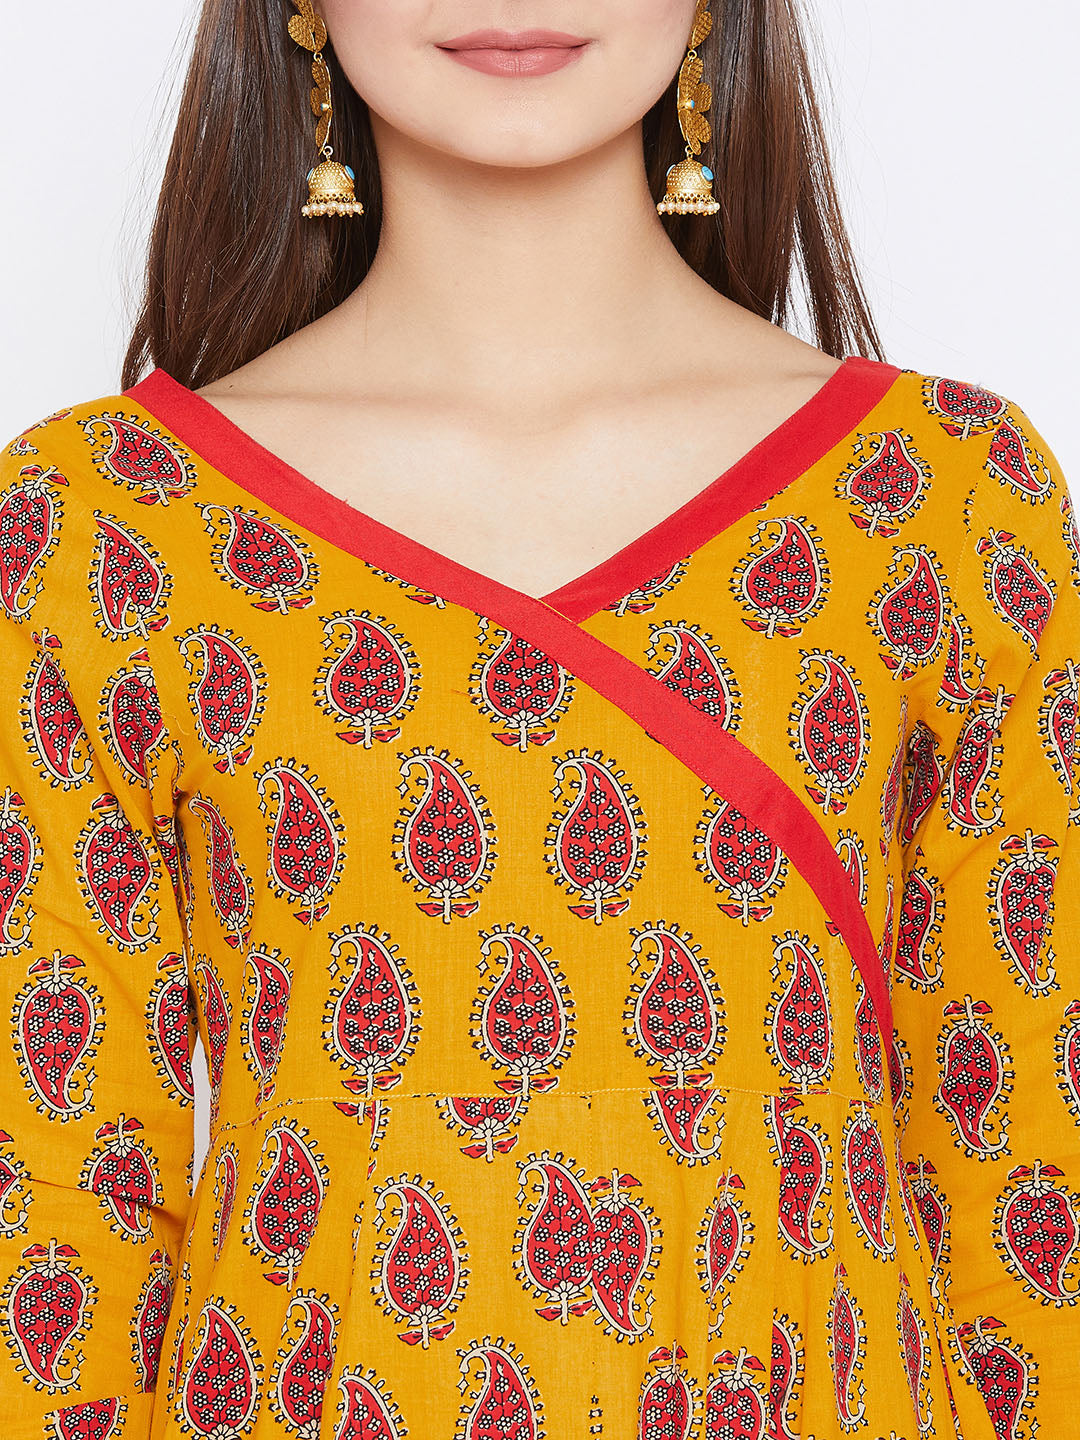 Women's Yellow And Red Color Paisley Printed Anarkali Ankle Length Kurta